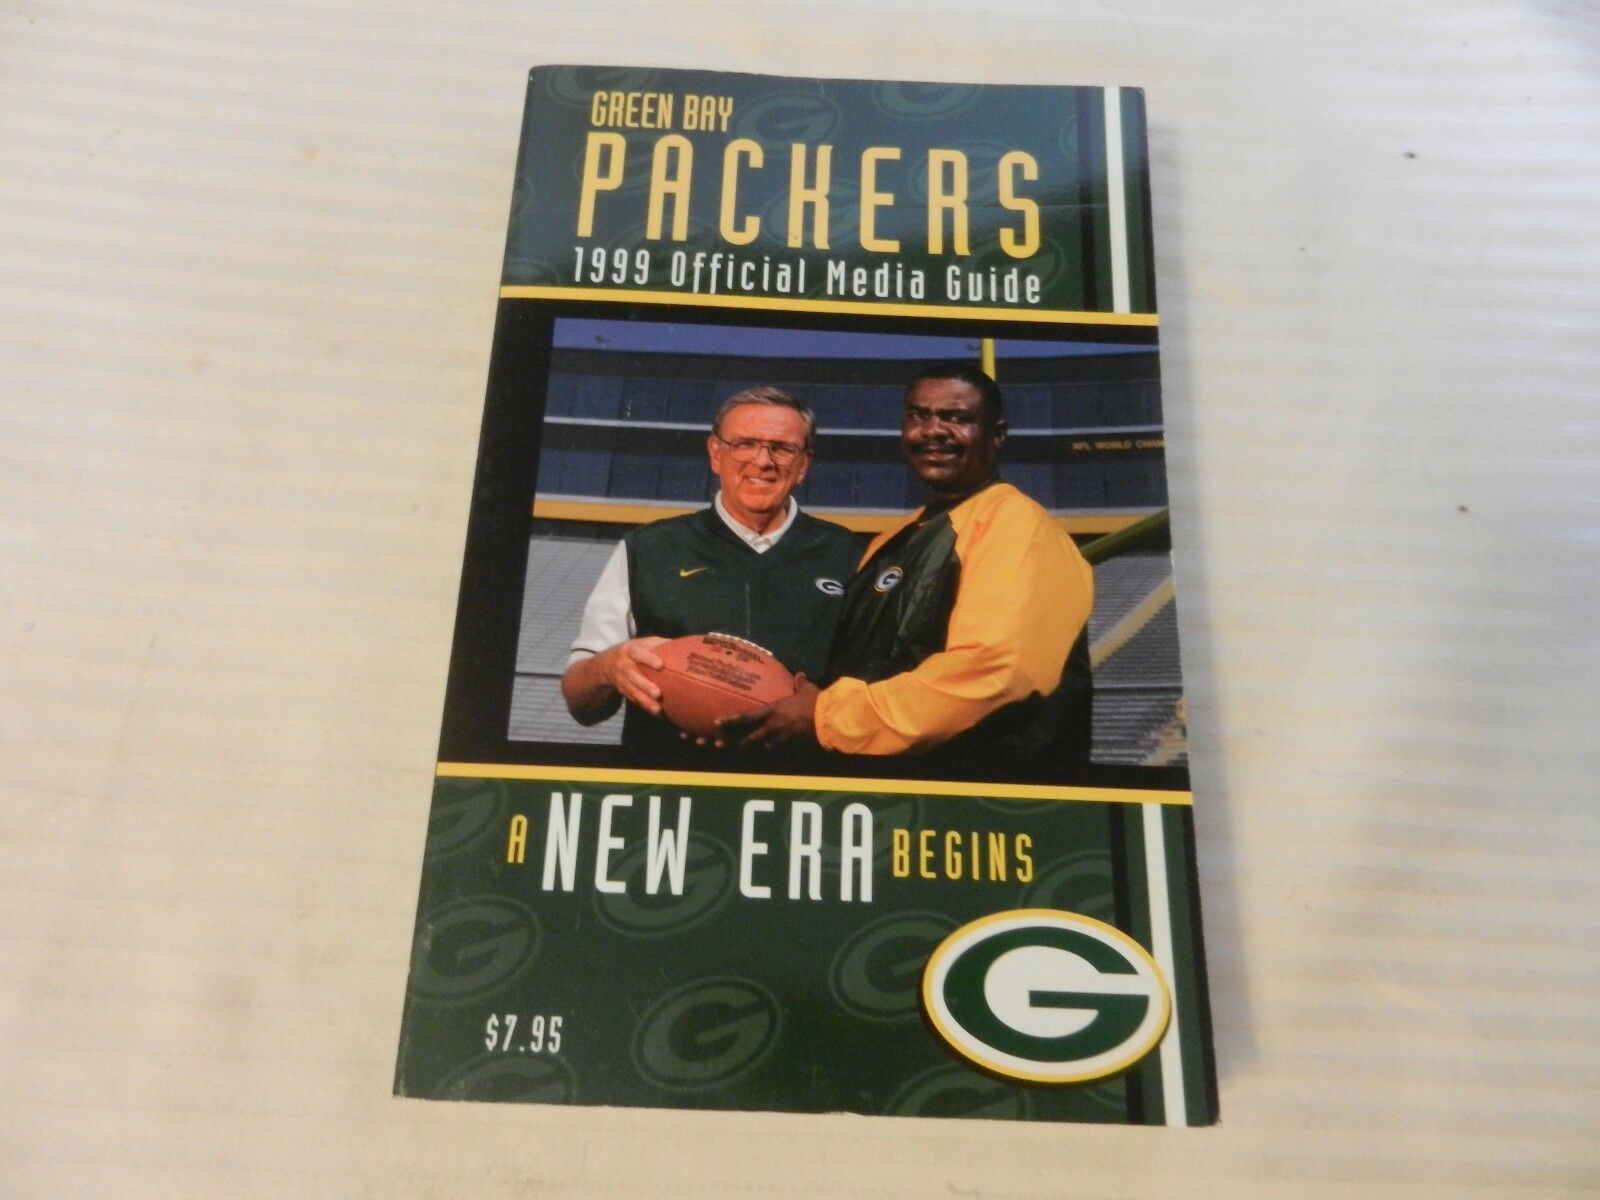 Primary image for 1999 Green Bay Packers Official Media Guide Book Ron Wolf, Ray Rhodes on cover